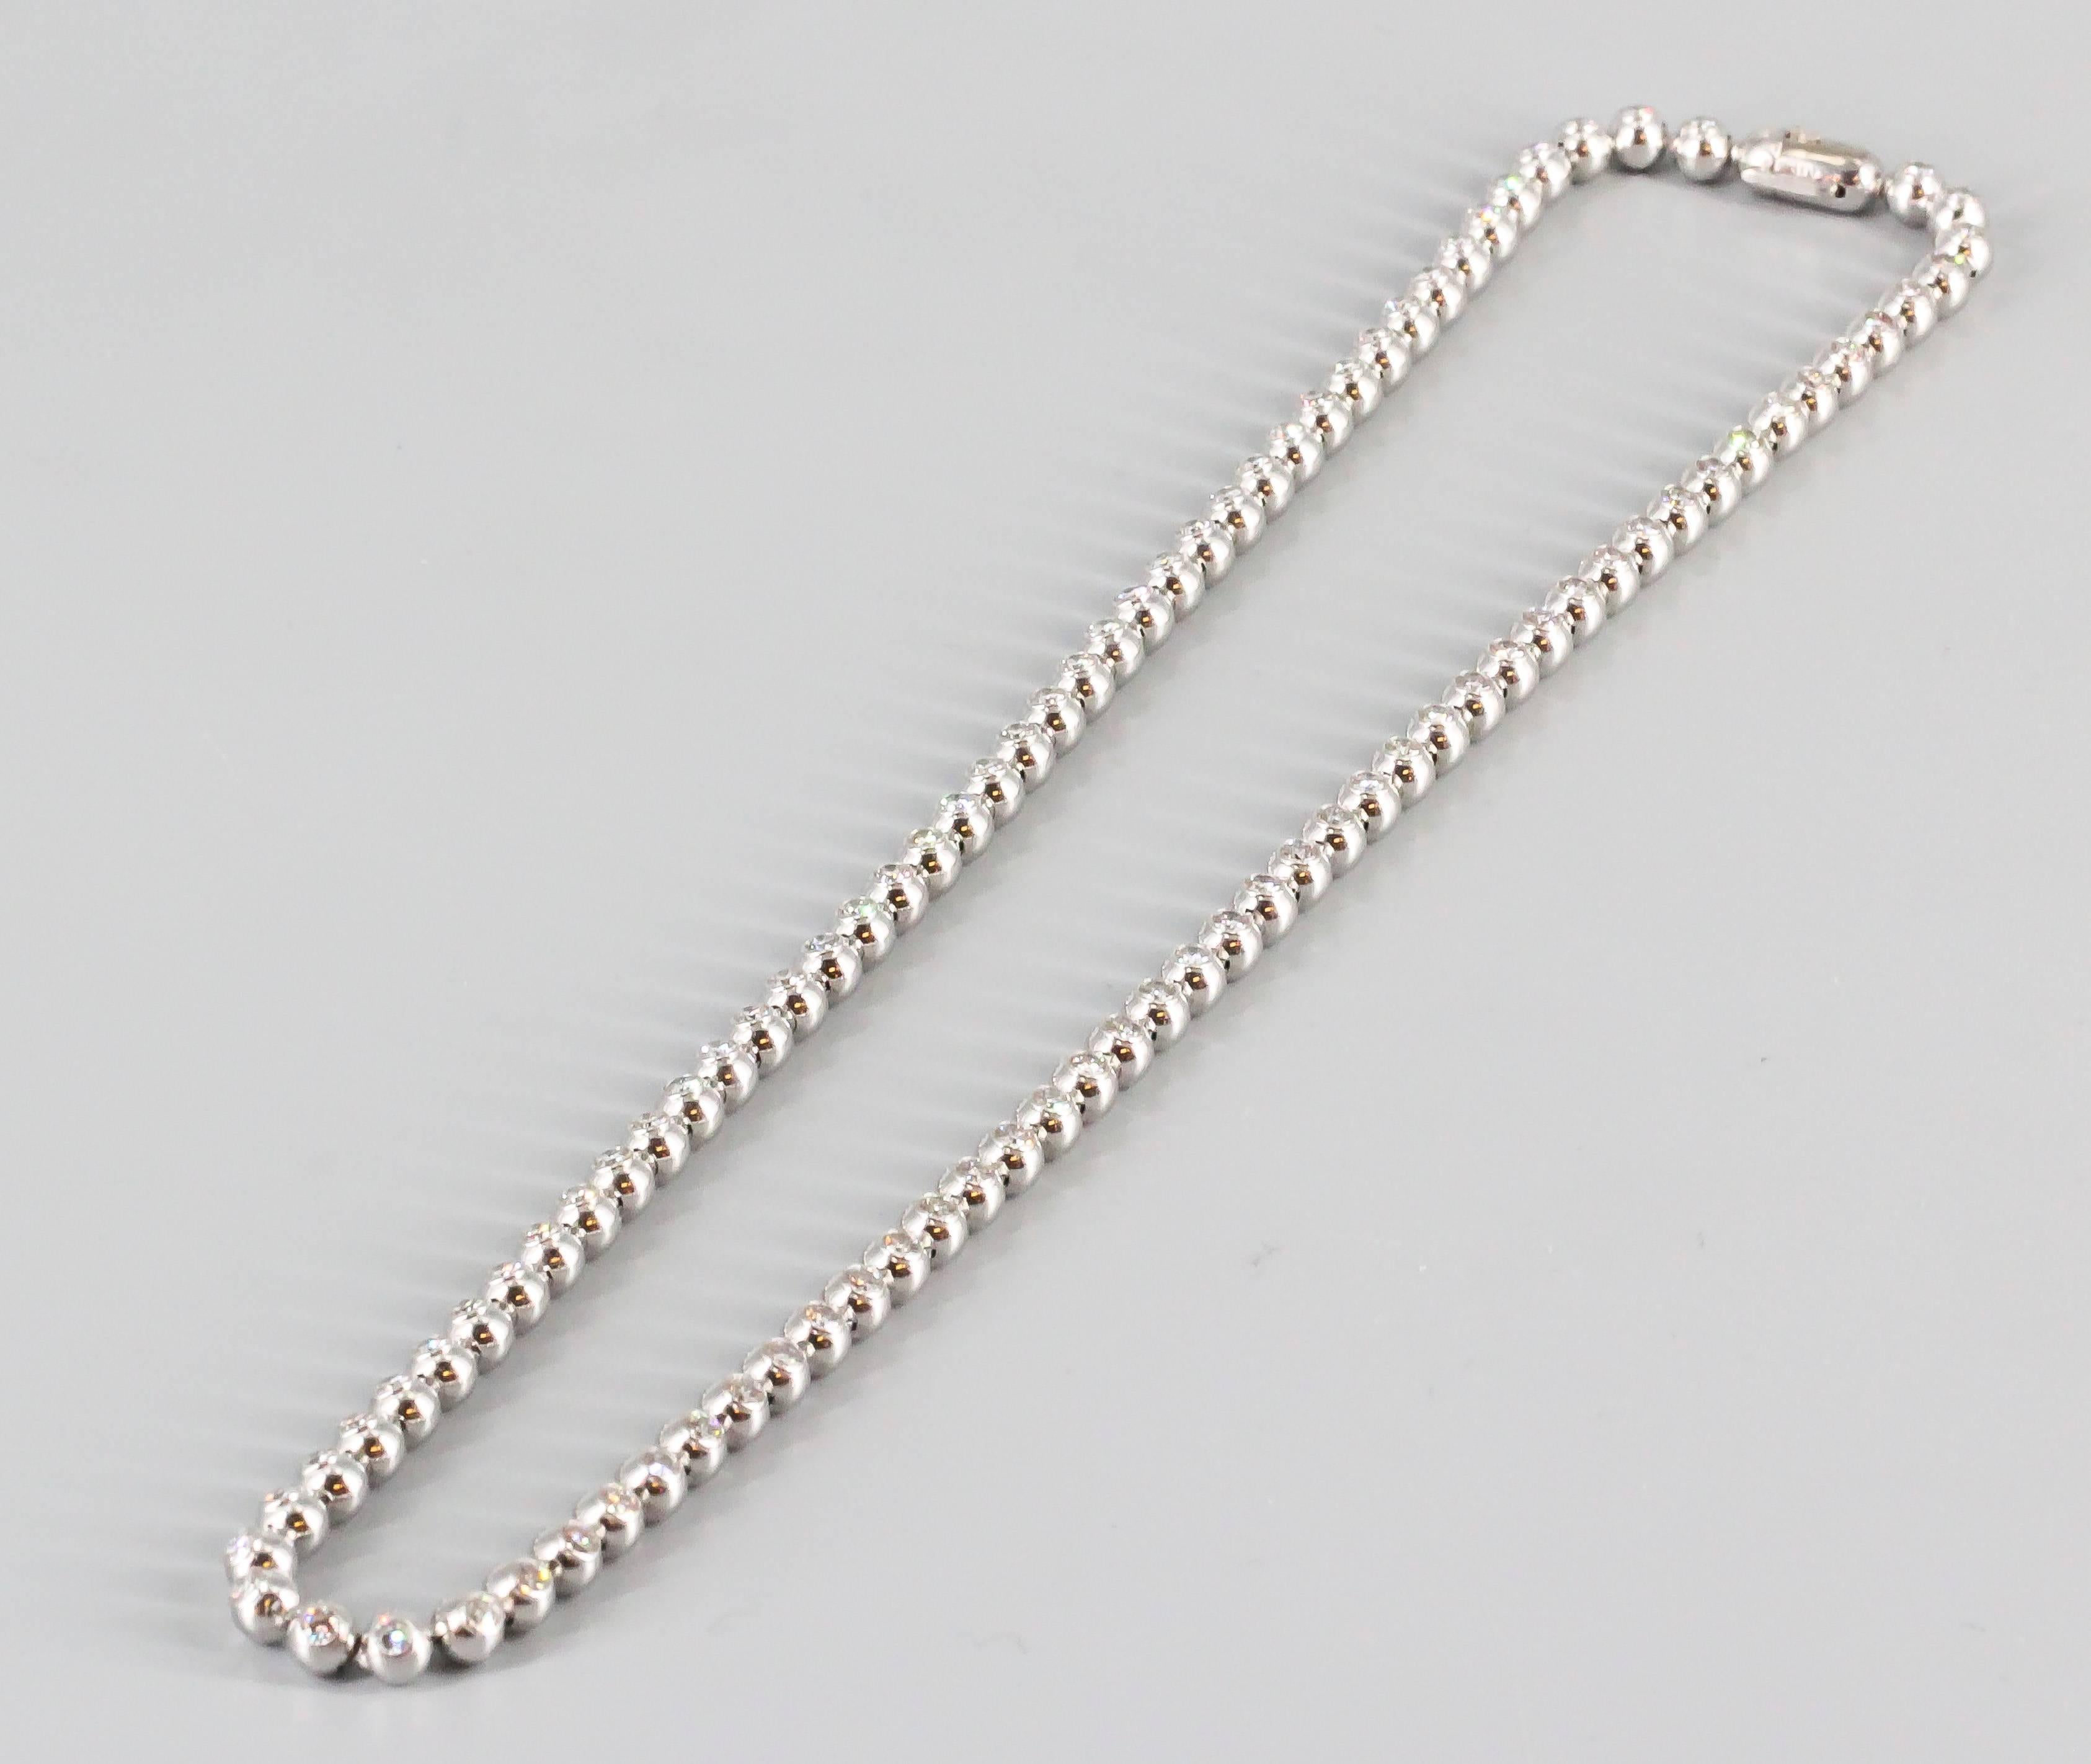 Chic diamond and 18K white gold necklace from the 